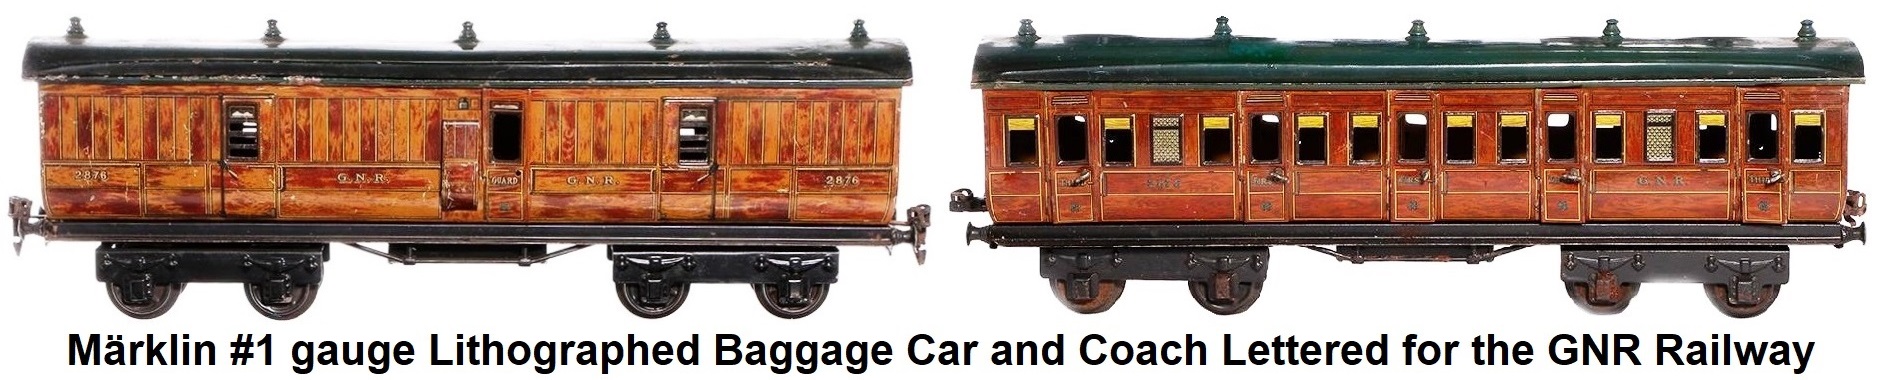 Märklin #1 gauge lithographed baggage and coach lettered for GNR railway